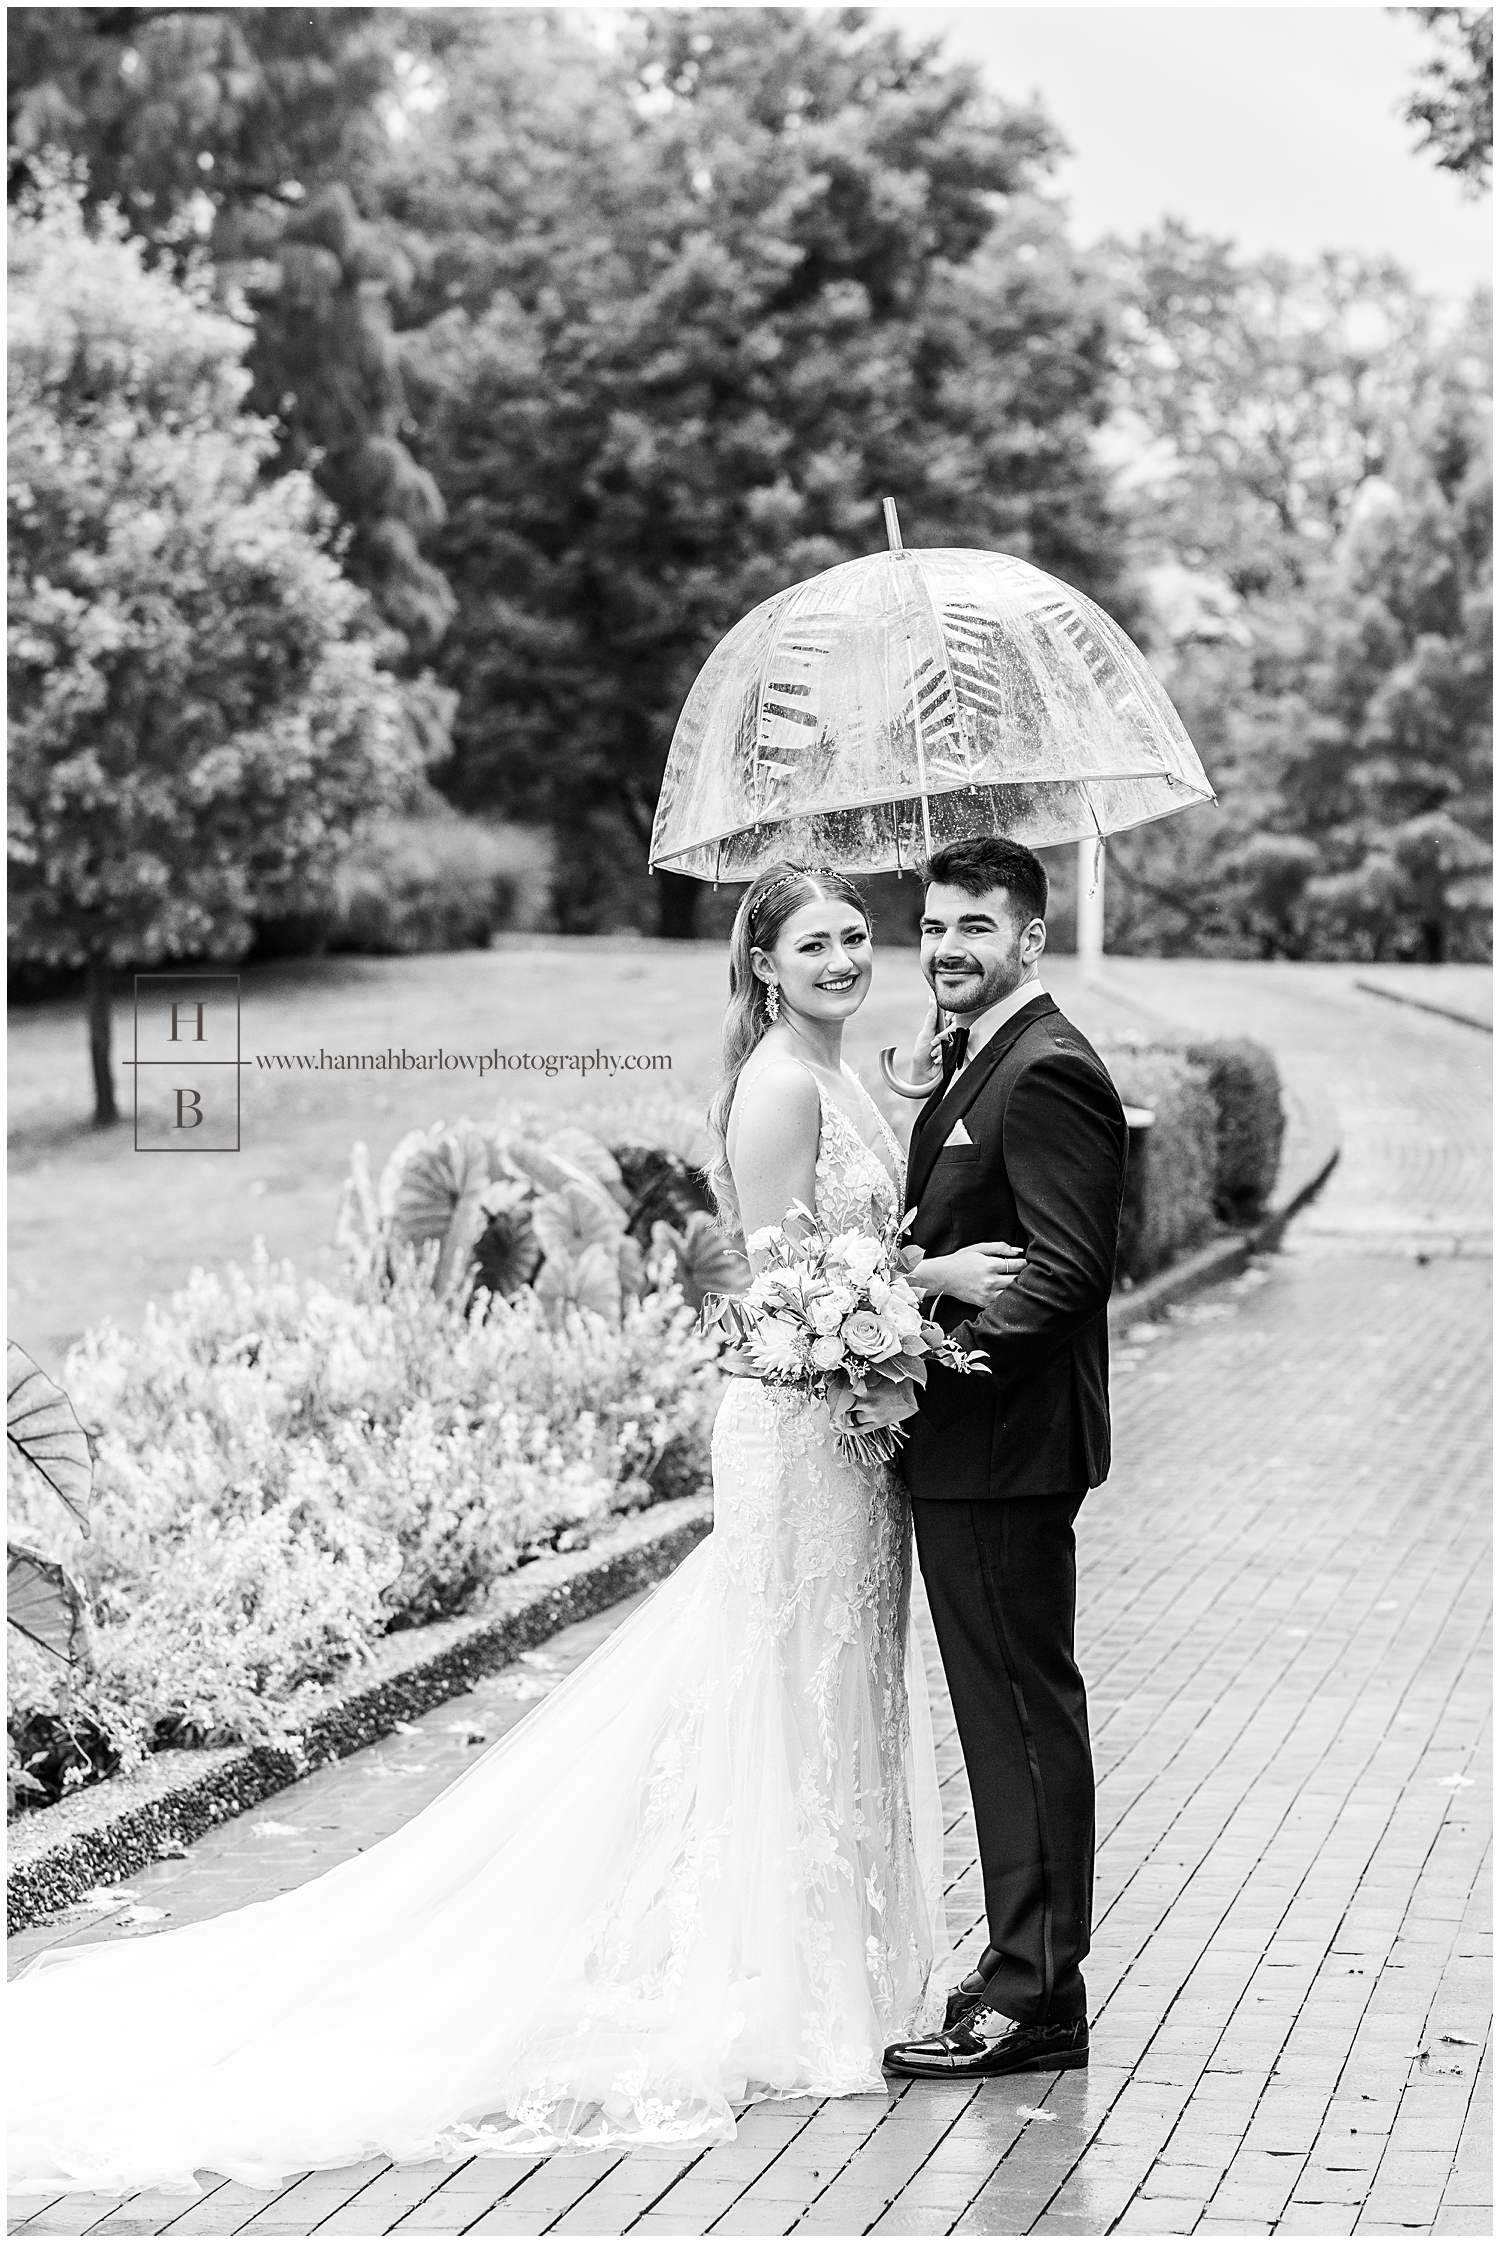 Black and white rainy wedding day photo with bride and groom holding umbrella.